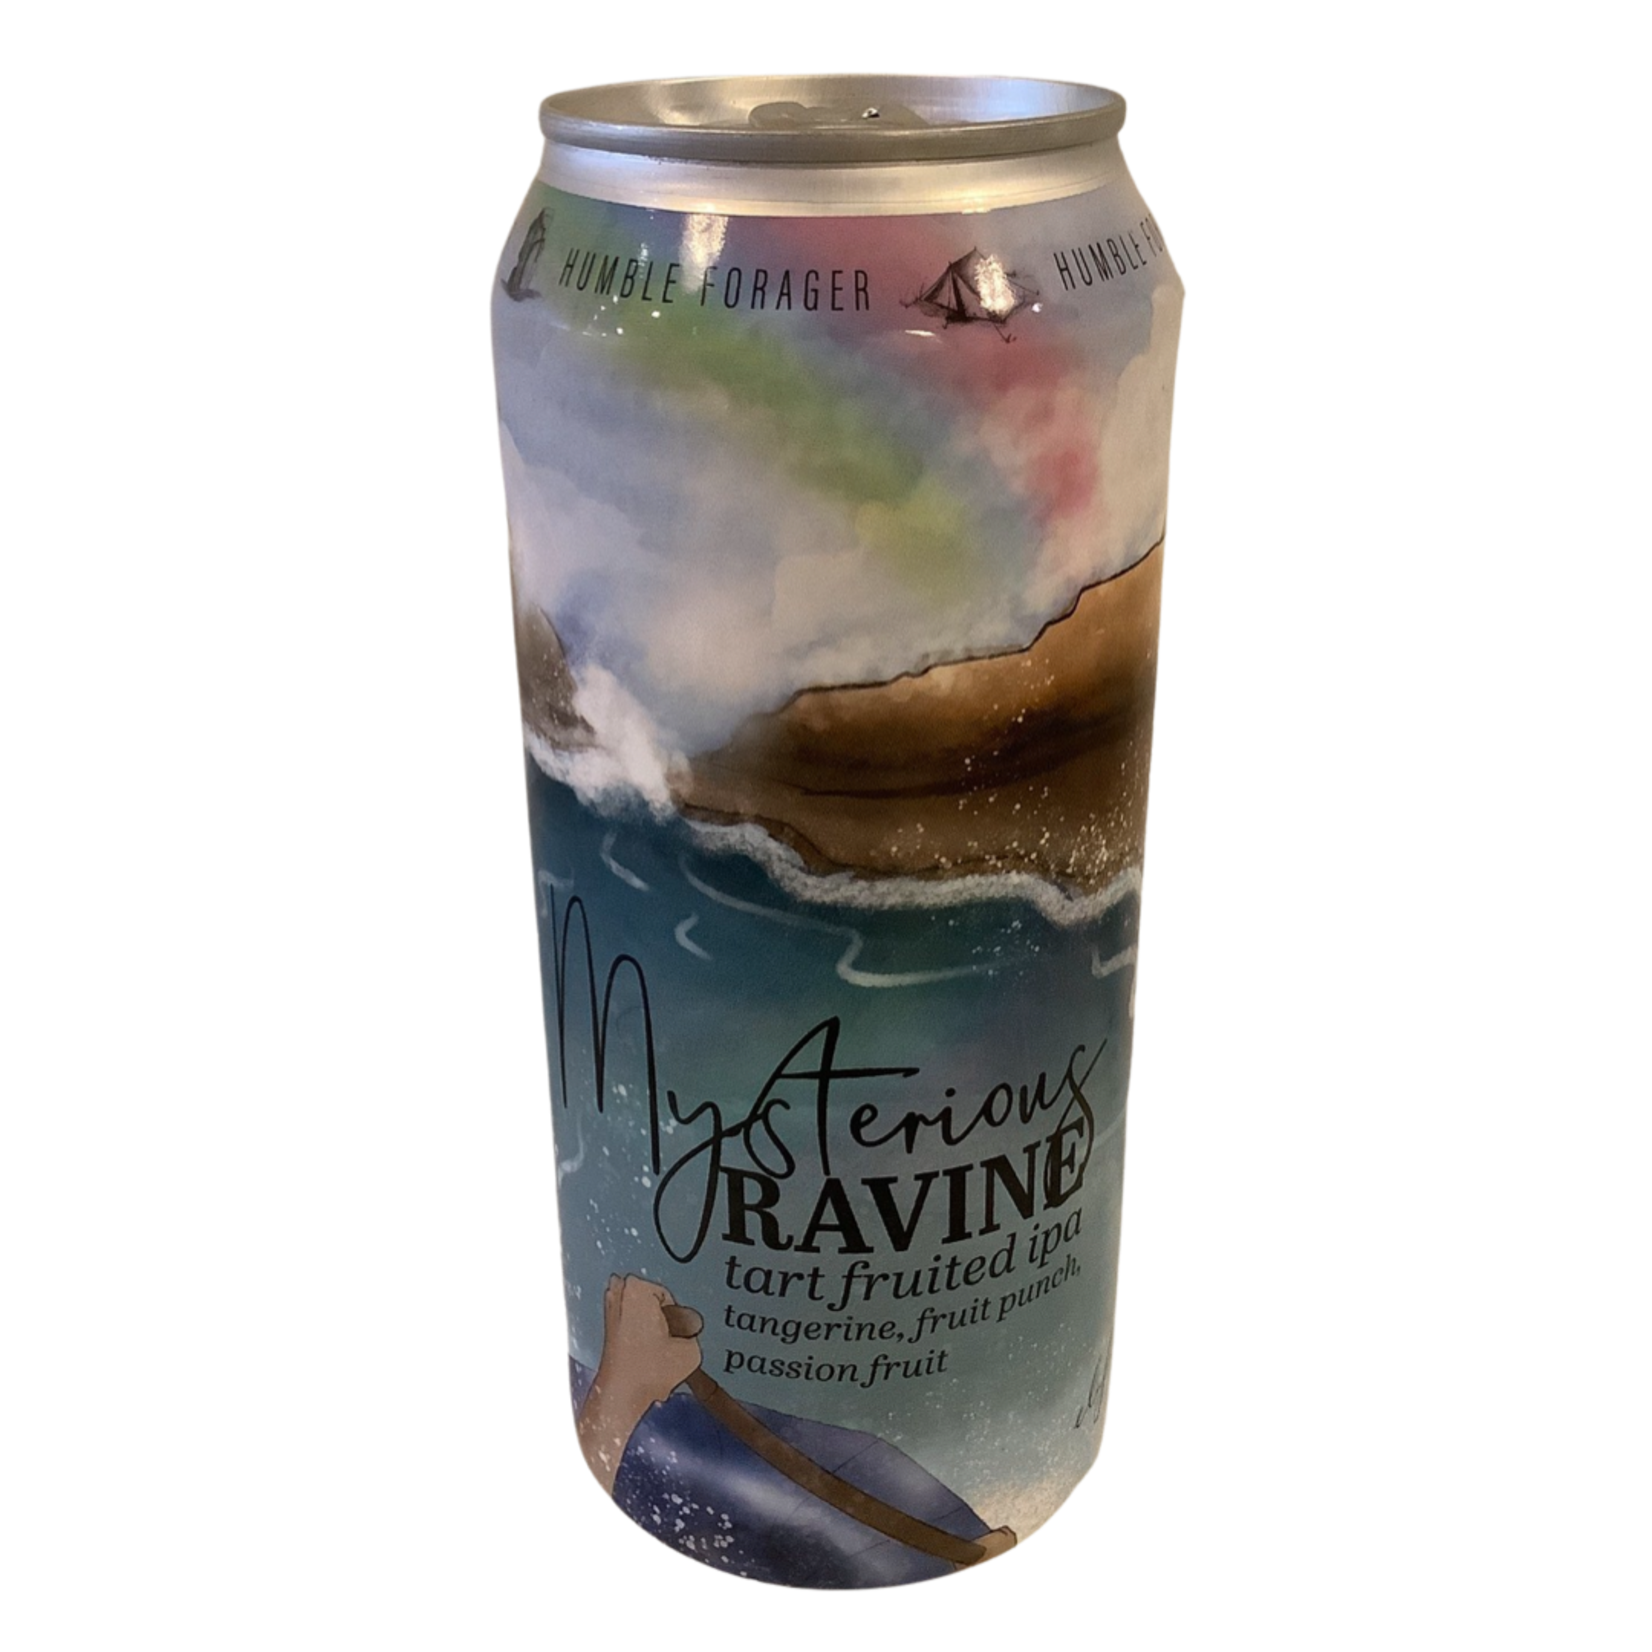 Humble Forager Brewing Co " Mysterious Ravine" Tart Fruited IPA (16 OZ), Waunakee WI